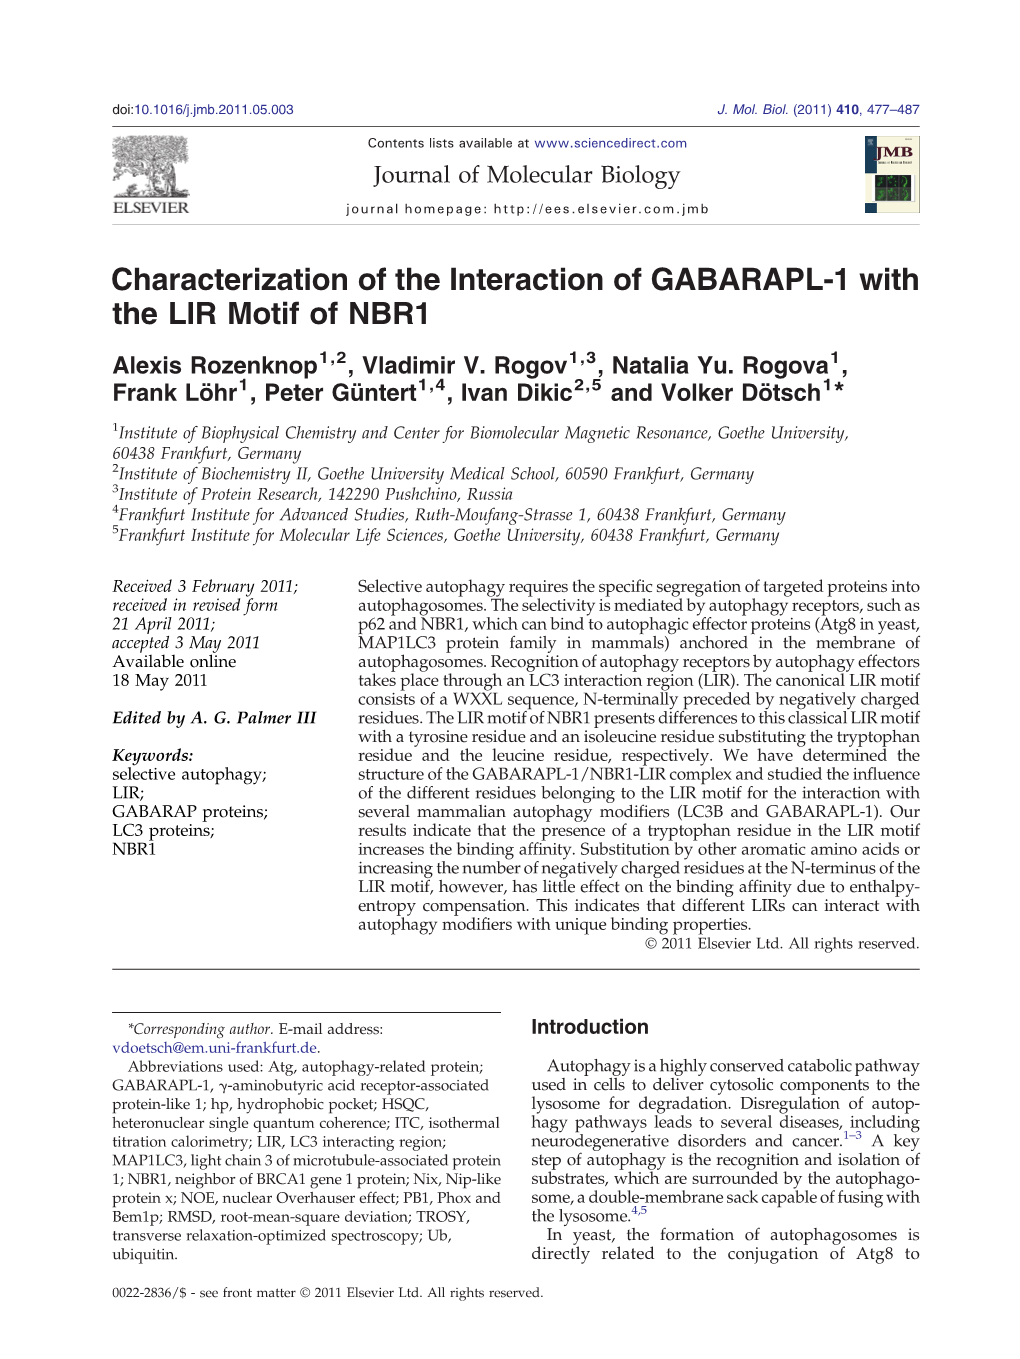 Characterization of the Interaction of GABARAPL-1 with the LIR Motif of NBR1